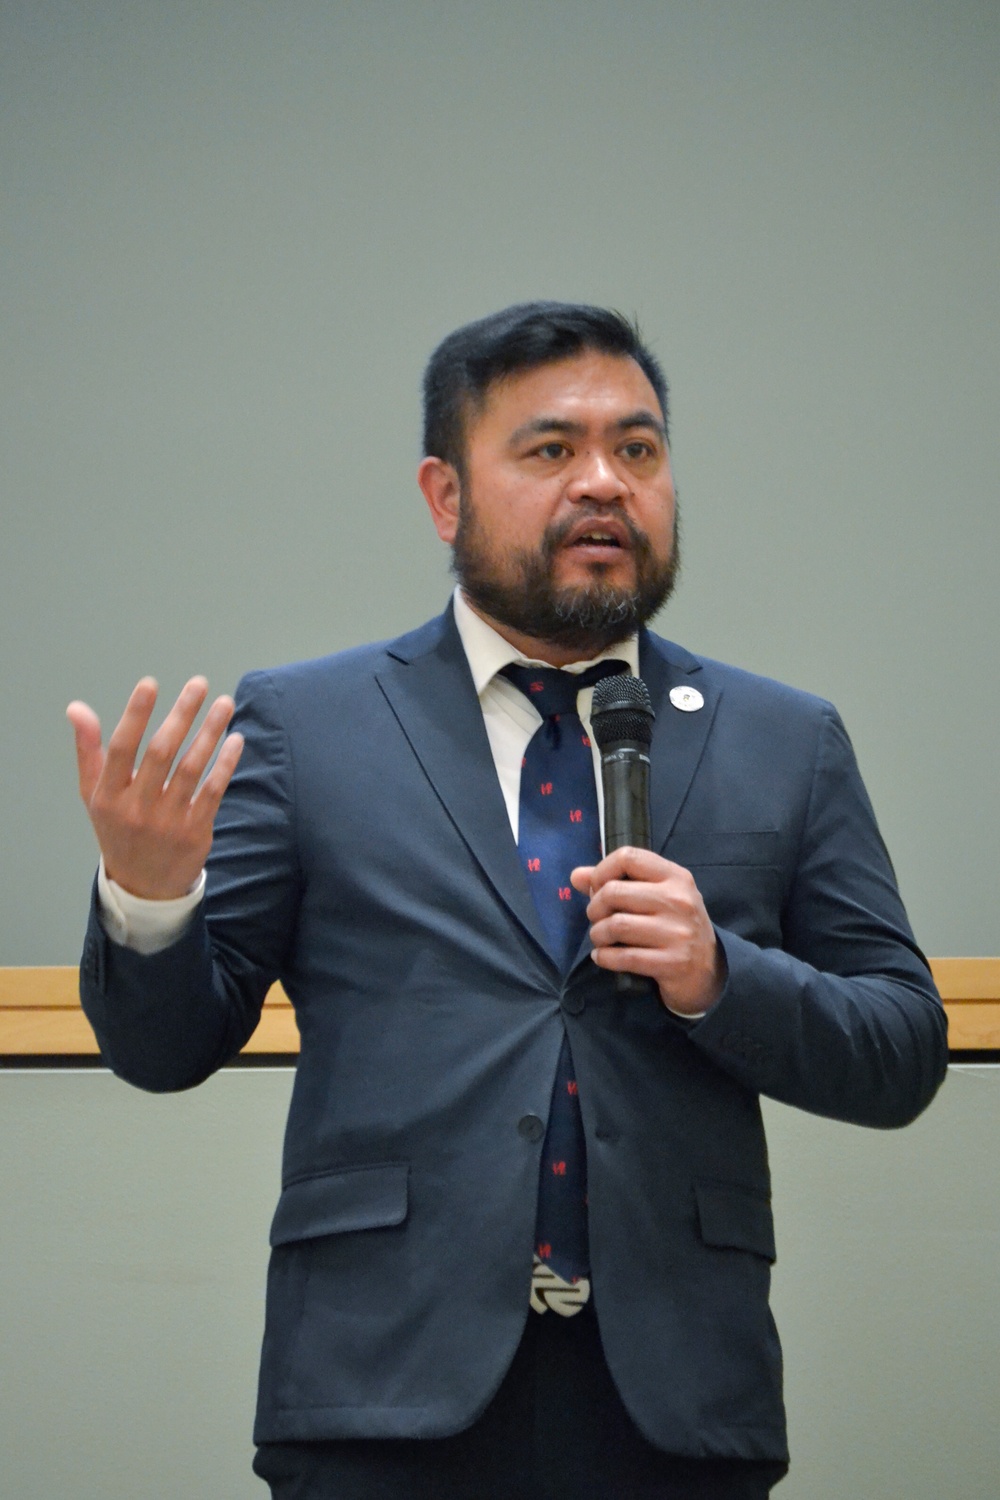 Asian American, Native Hawaiian and Pacific Islander event focuses on “advancing leaders through collaboration”